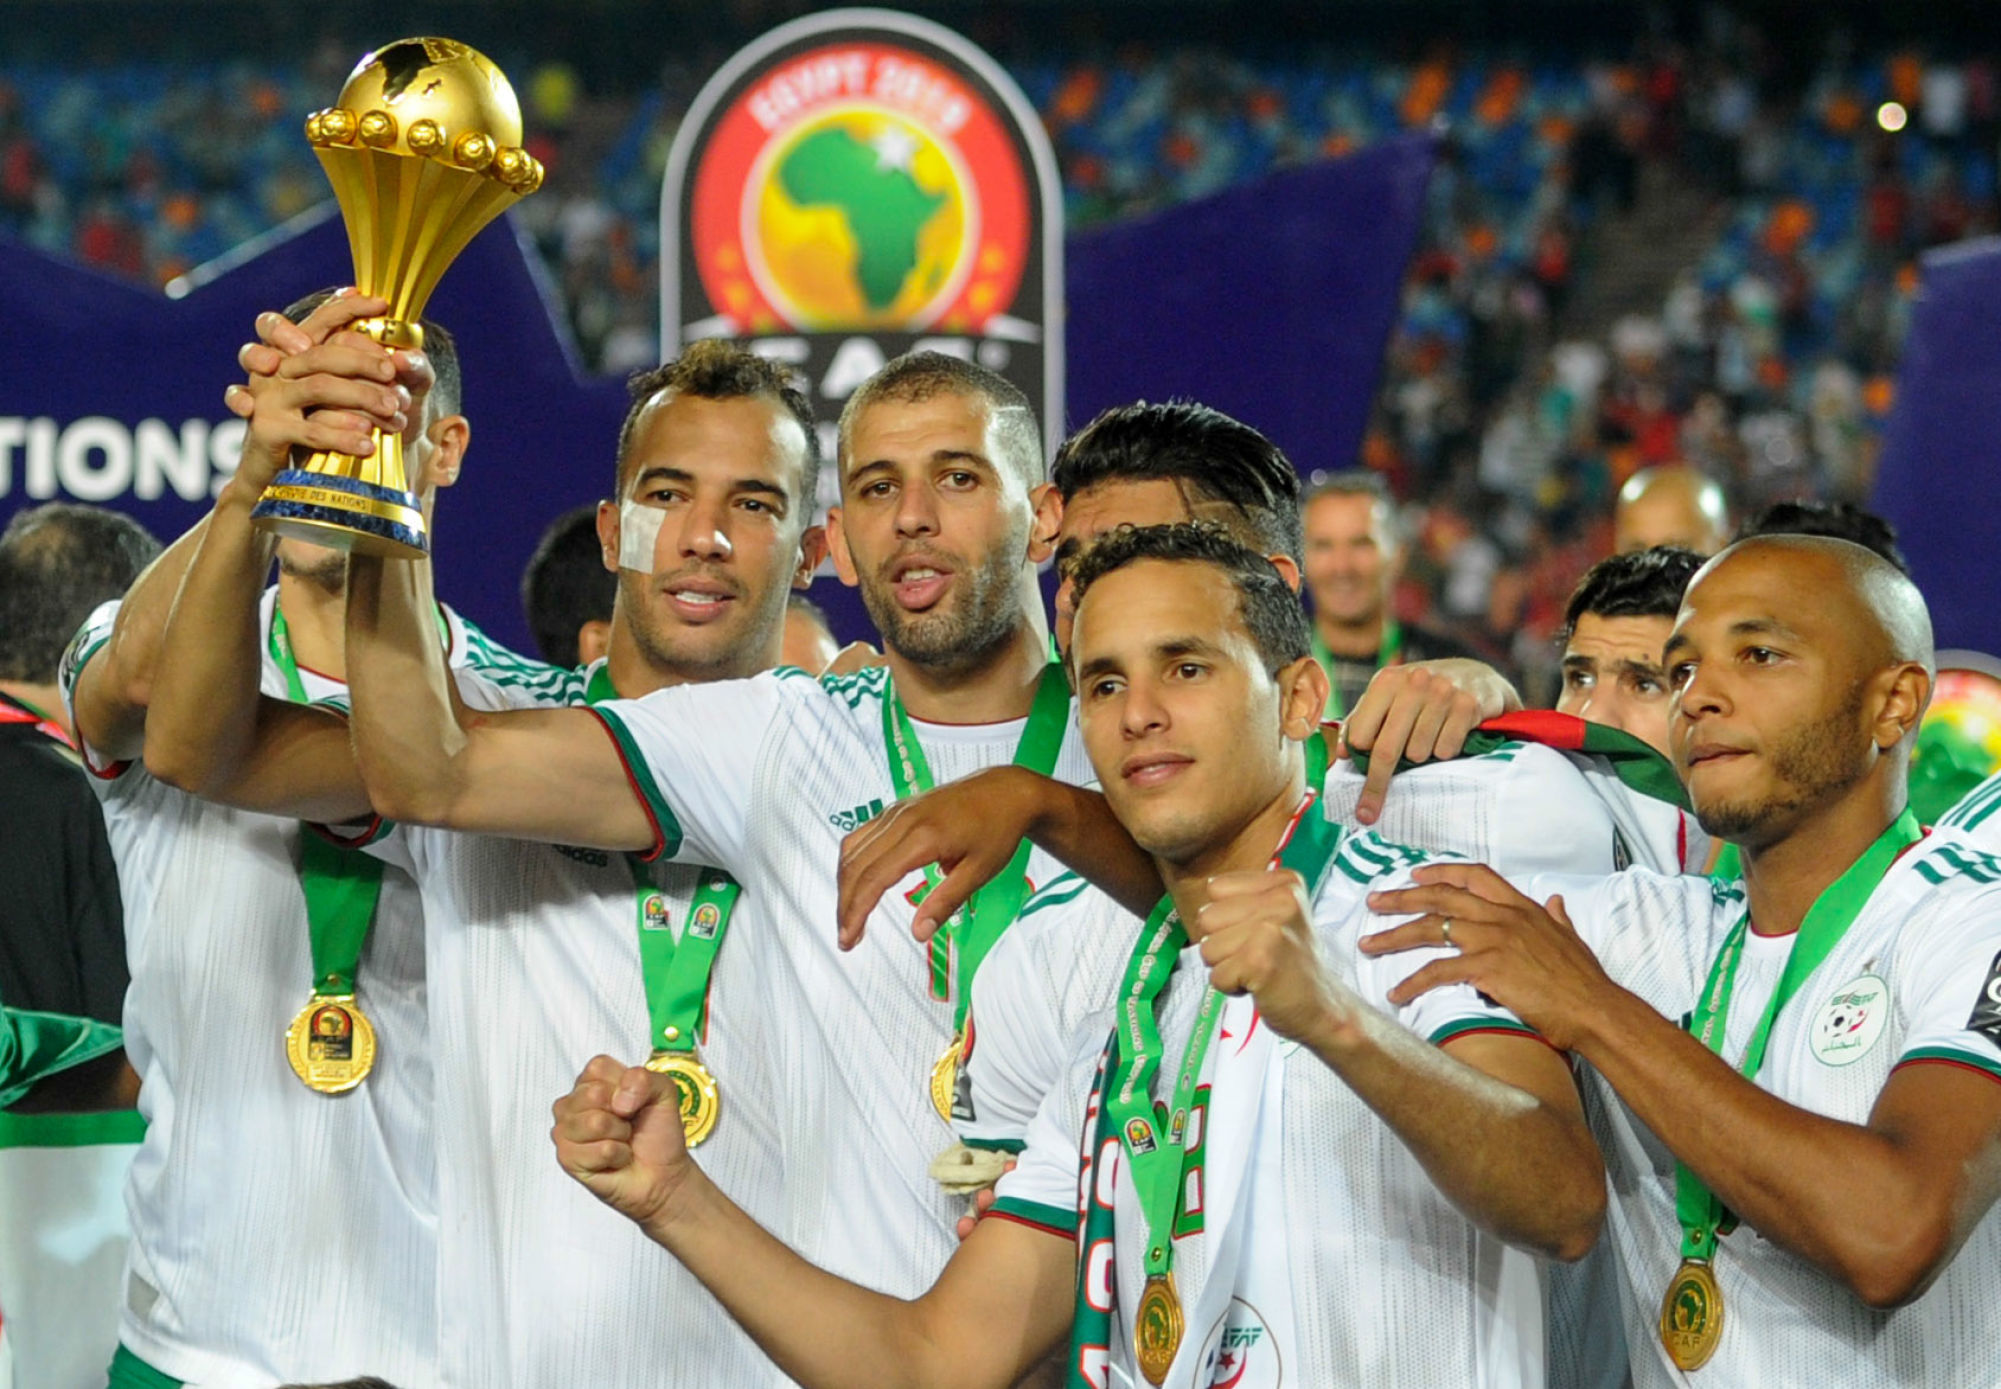 Algeria players celebrate after winning the 2019 Africa Cup of Nations Finals Final match between Senegal and Algeria at the Cairo International Stadium in Egypt on 19 July 2019. Photo : PA Images / Icon Sport